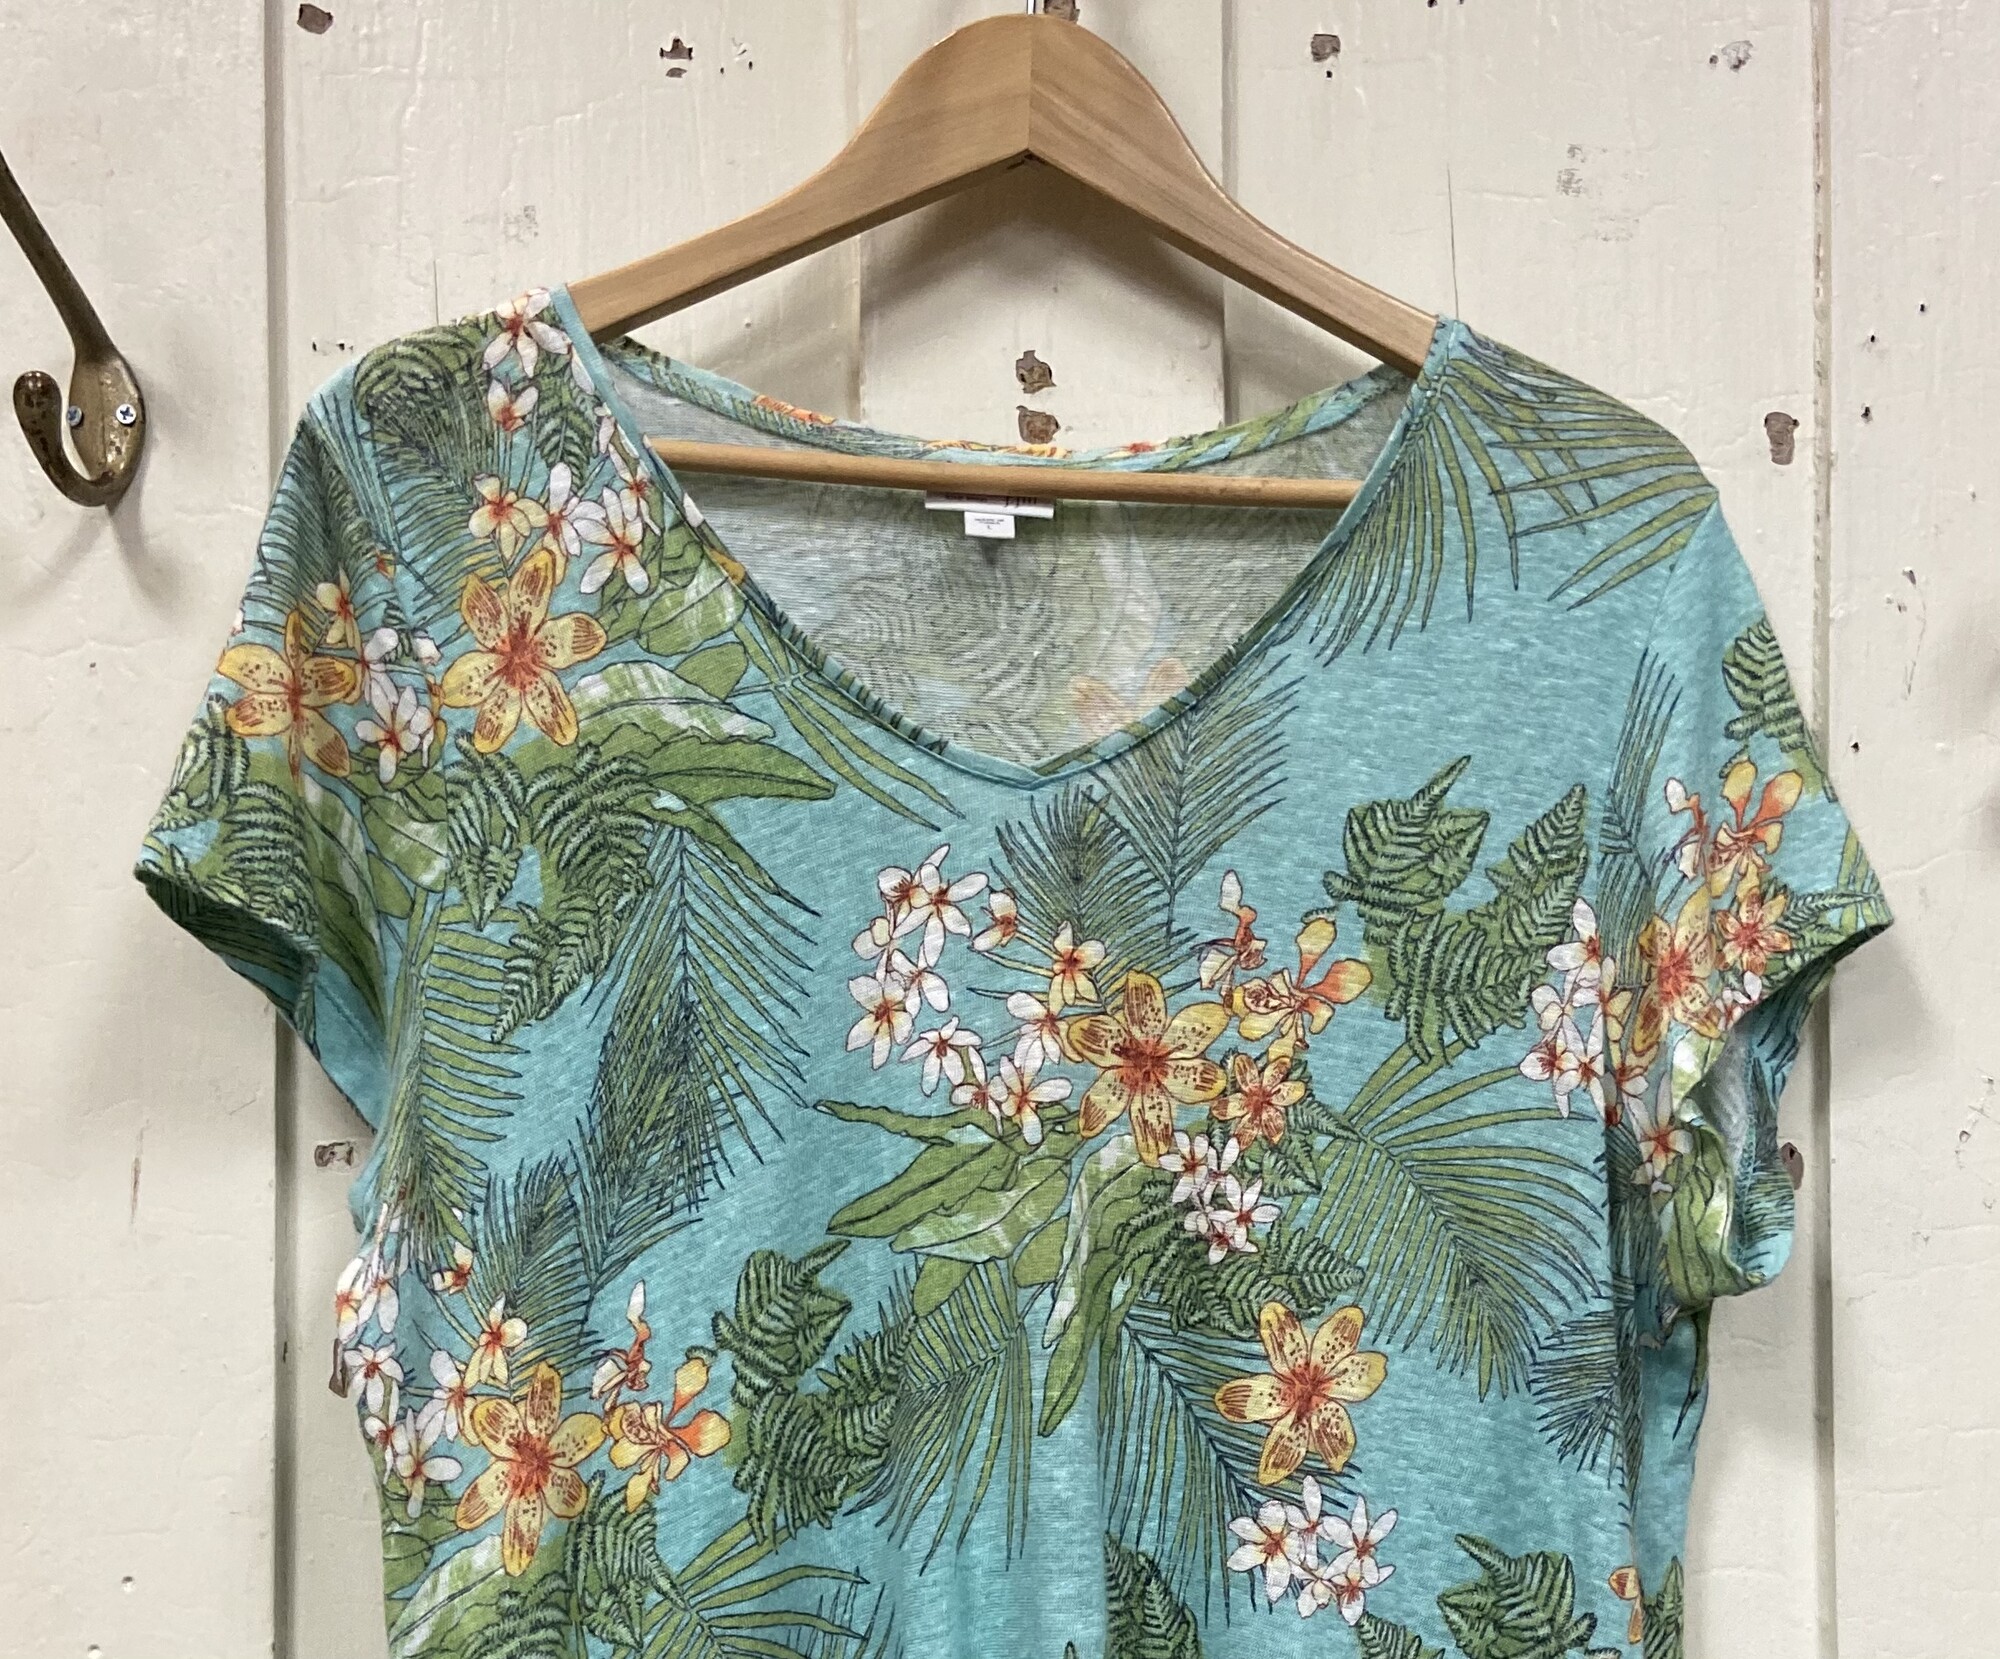 Teal Tropical Linen Tee
Teal/yll
Size: Large